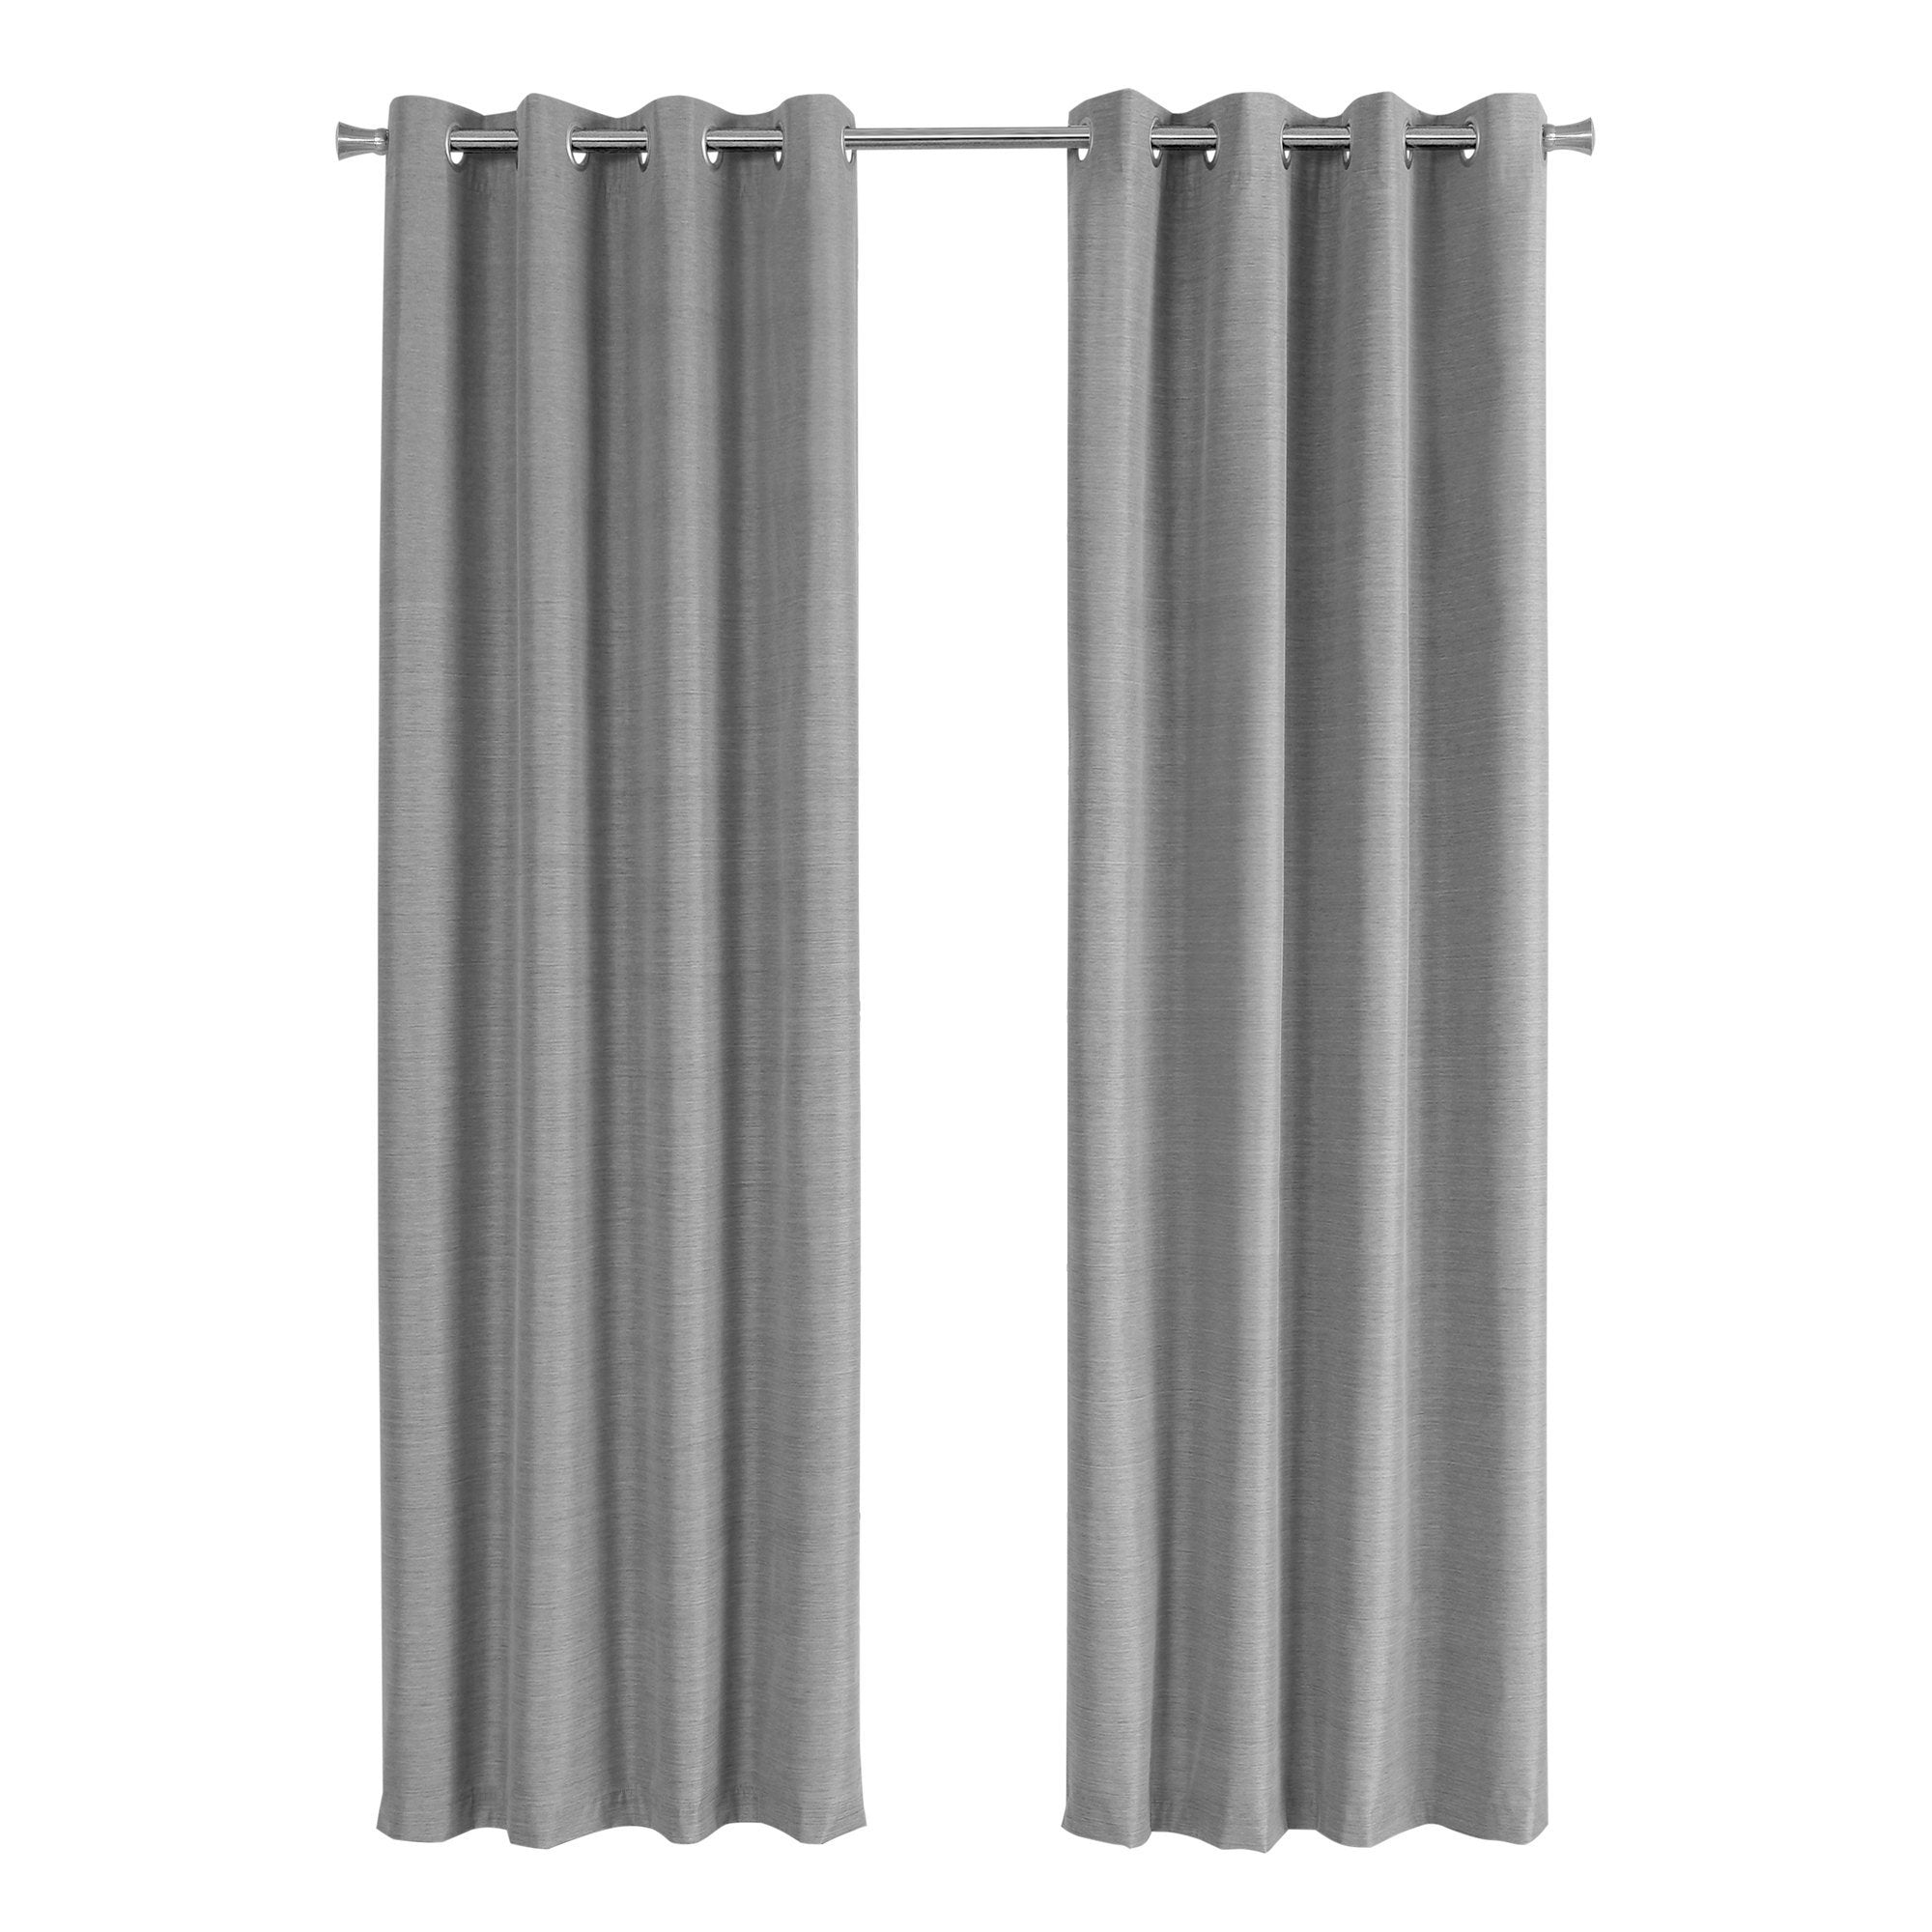 MN-859842    Curtain Panel, 2Pcs Set, 54"W X 95"L, 100% Blackout, Grommet, Living Room, Bedroom, Kitchen, Thermal Insulation Fabric, Polyester Full Light Blocking Fabric, Grey, Contemporary, Modern